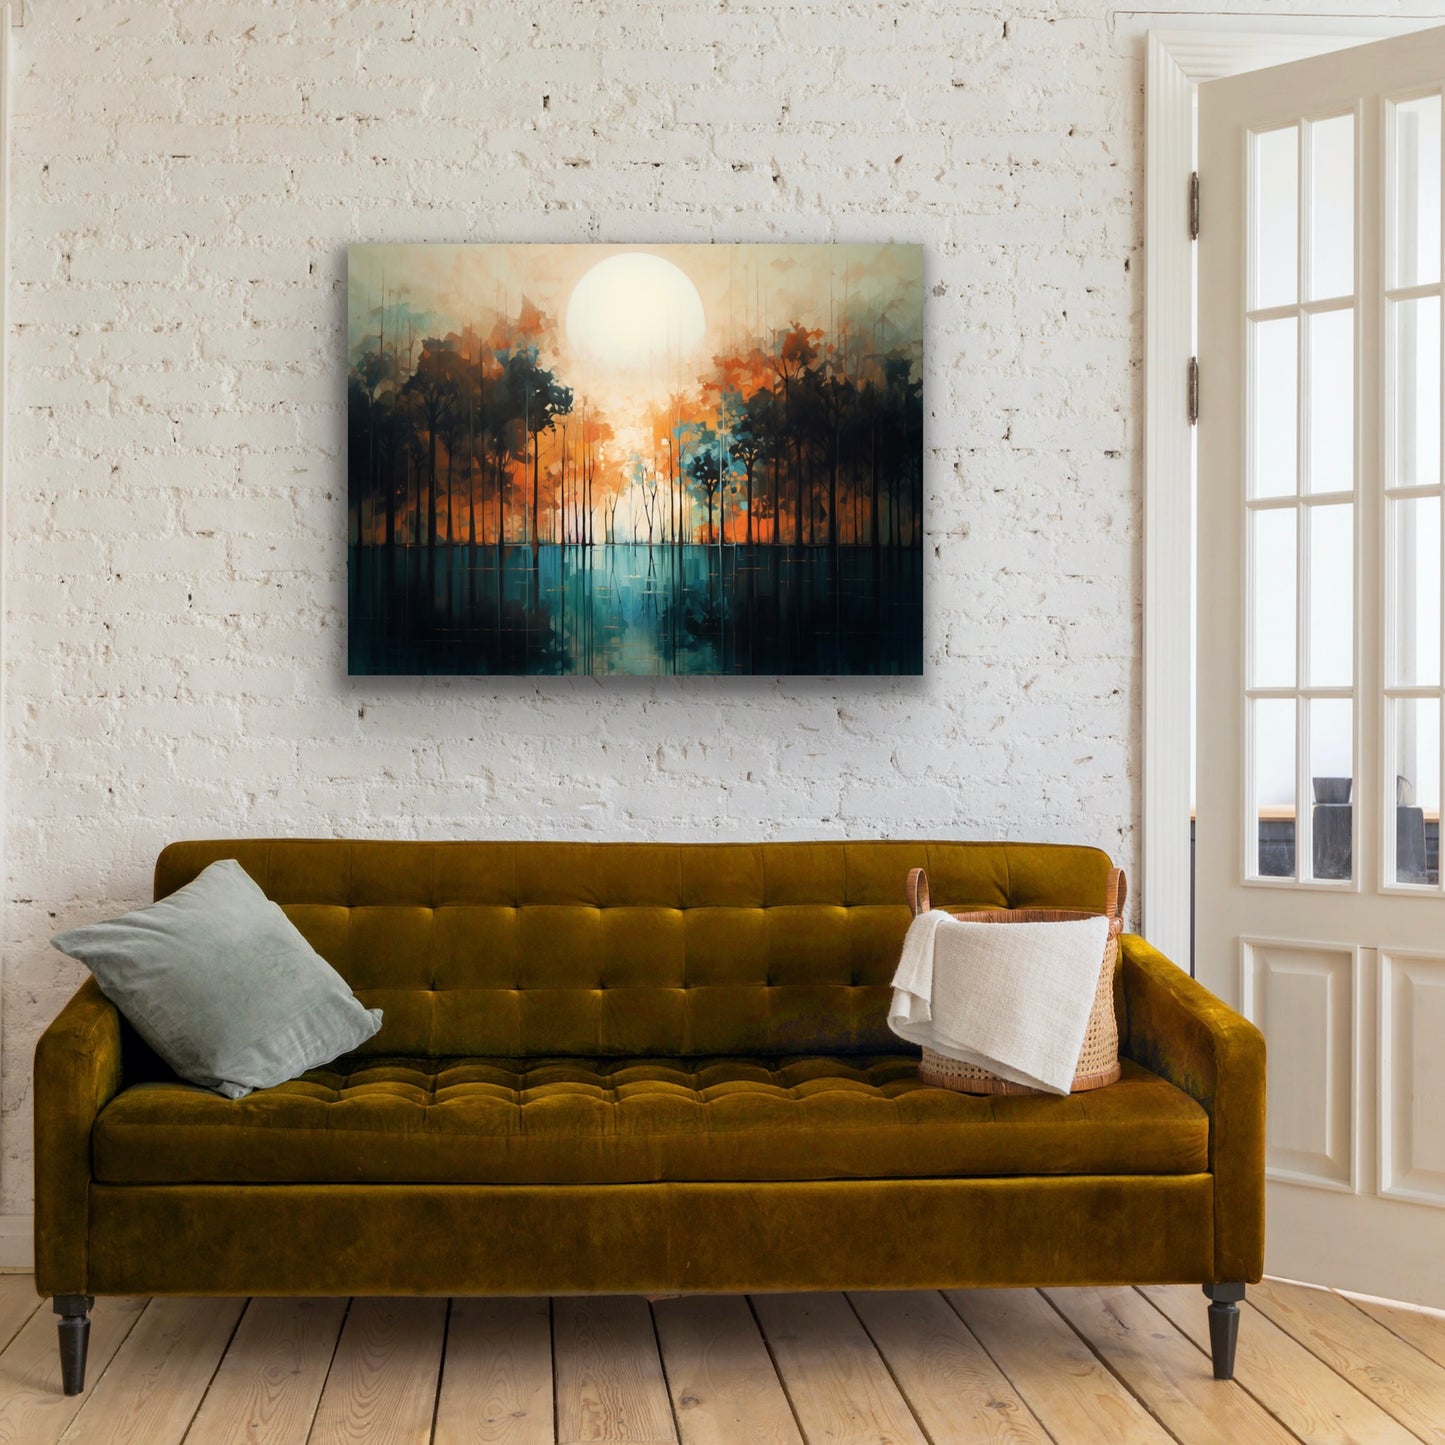 The Sunset | Stretched Canvas Print Wall Art | African American Art | Staging Art